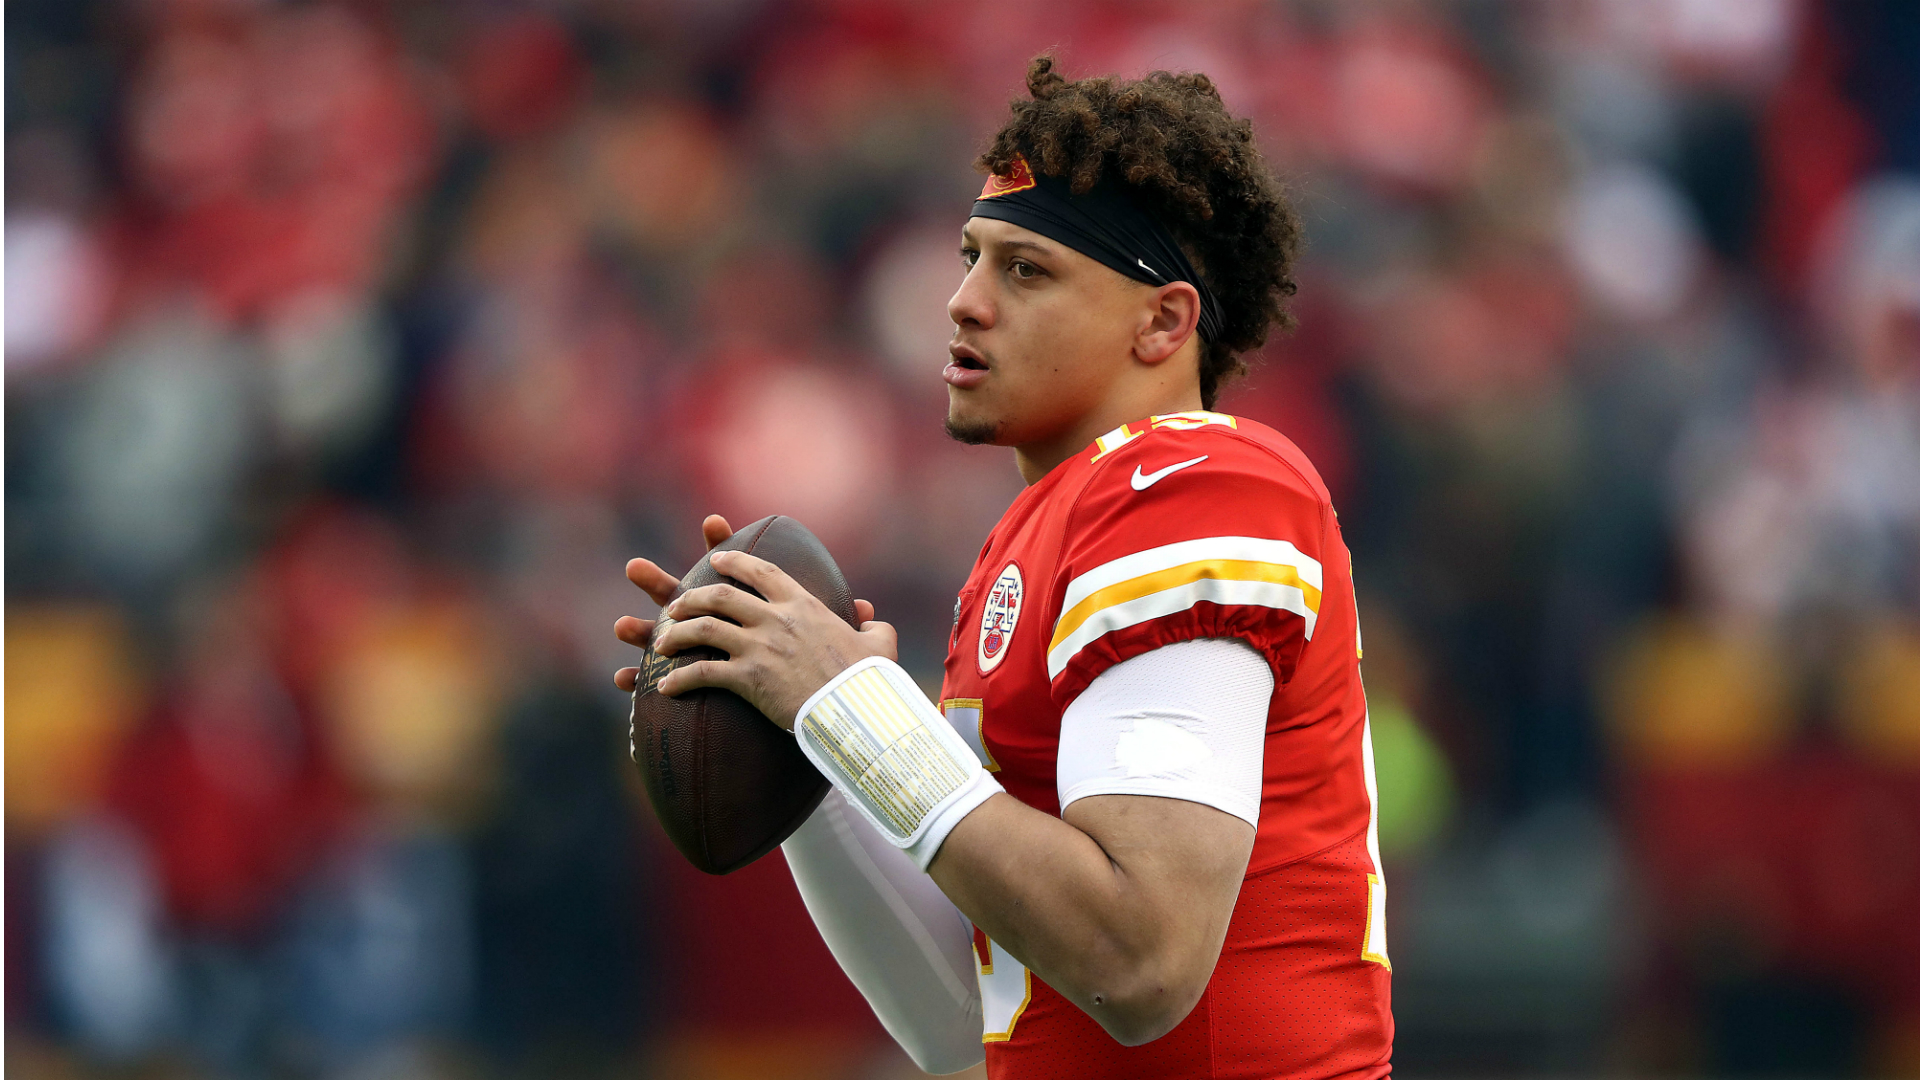 Kansas City Chiefs 2019 season schedule, scores and TV streams in Canada | Sporting ...